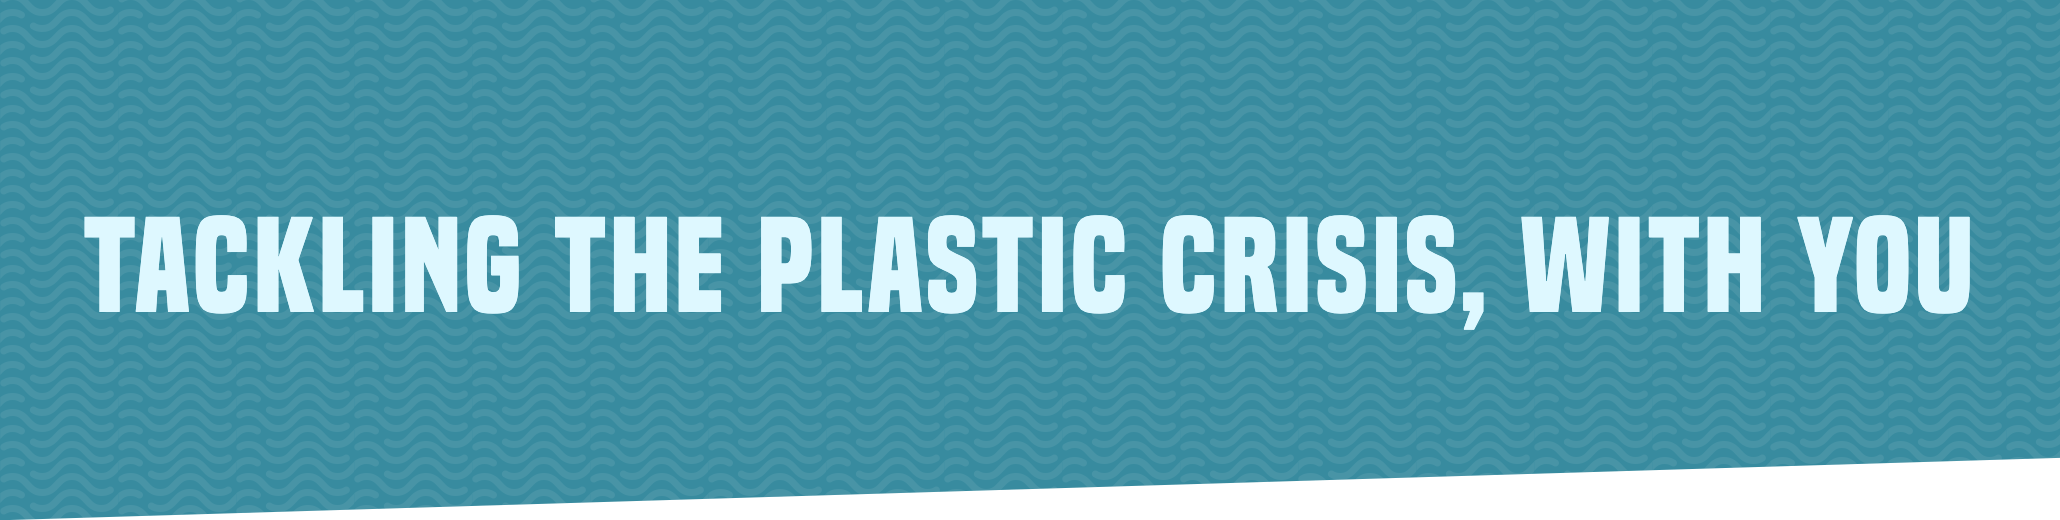 Tackling the Plastic Crisis, With You